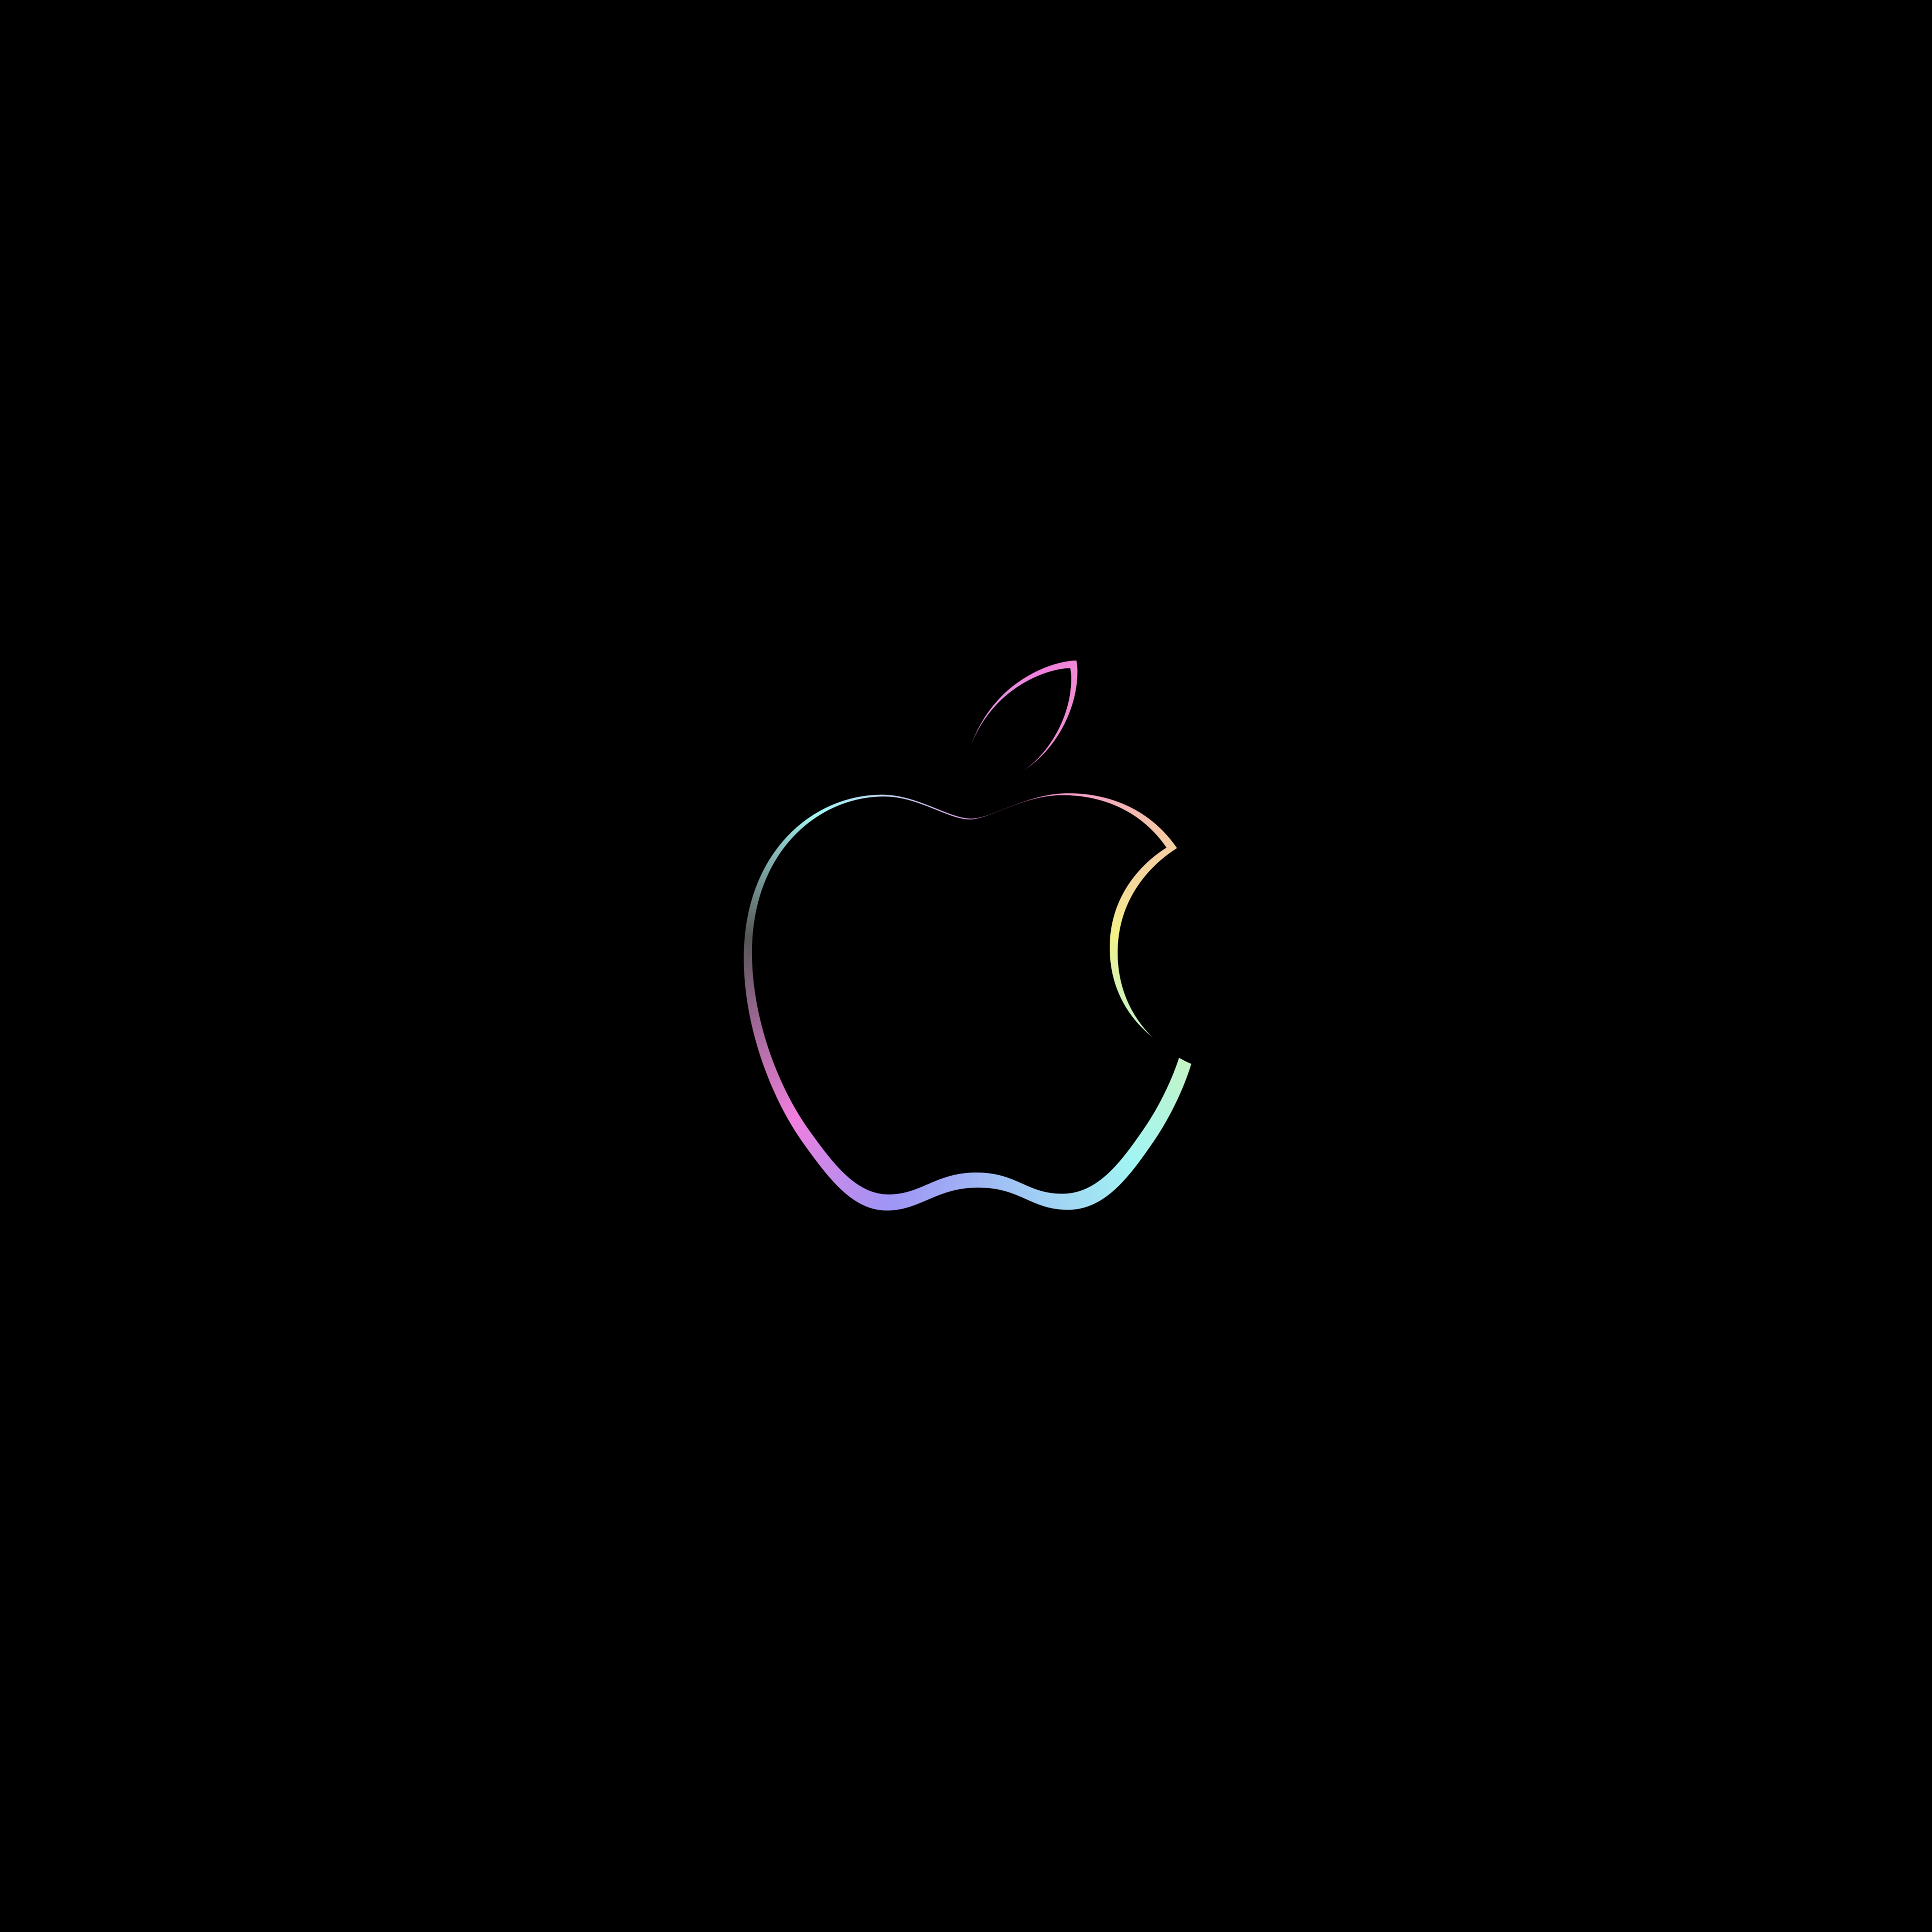 Just a Simple Apple Wallpaper